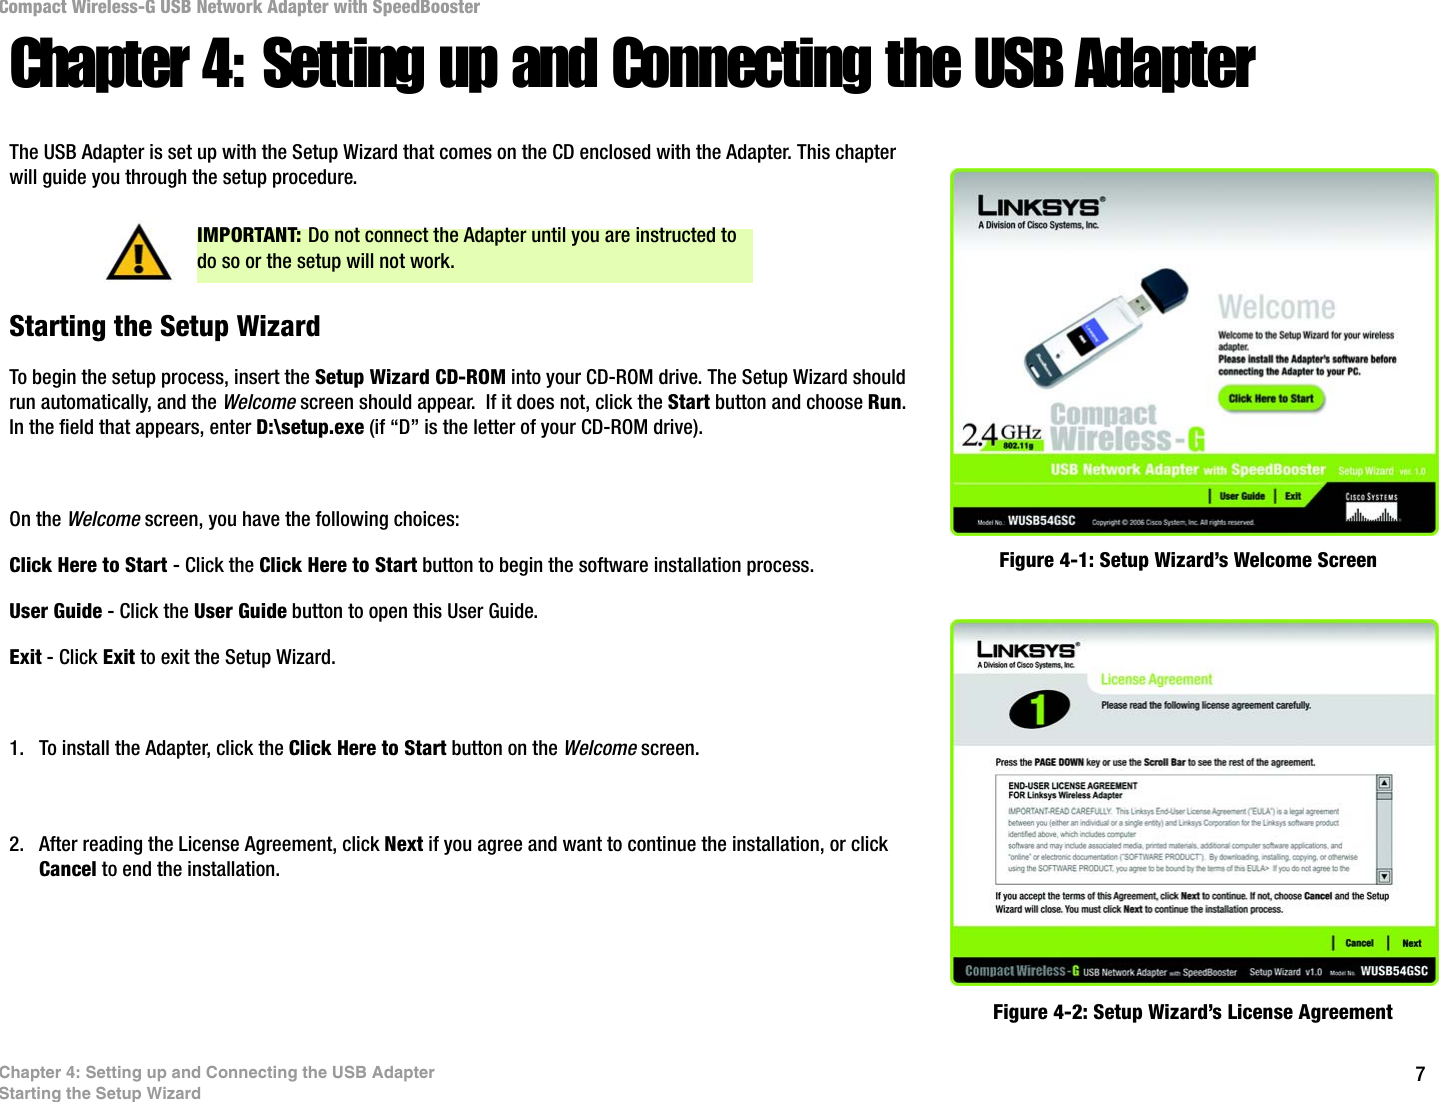 7Chapter 4: Setting up and Connecting the USB AdapterStarting the Setup WizardCompact Wireless-G USB Network Adapter with SpeedBoosterChapter 4: Setting up and Connecting the USB AdapterThe USB Adapter is set up with the Setup Wizard that comes on the CD enclosed with the Adapter. This chapter will guide you through the setup procedure. Starting the Setup WizardTo begin the setup process, insert the Setup Wizard CD-ROM into your CD-ROM drive. The Setup Wizard should run automatically, and the Welcome screen should appear.  If it does not, click the Start button and choose Run. In the field that appears, enter D:\setup.exe (if “D” is the letter of your CD-ROM drive). On the Welcome screen, you have the following choices:Click Here to Start - Click the Click Here to Start button to begin the software installation process. User Guide - Click the User Guide button to open this User Guide. Exit - Click Exit to exit the Setup Wizard.1. To install the Adapter, click the Click Here to Start button on the Welcome screen.2. After reading the License Agreement, click Next if you agree and want to continue the installation, or click Cancel to end the installation.Figure 4-1: Setup Wizard’s Welcome ScreenFigure 4-2: Setup Wizard’s License AgreementIMPORTANT: Do not connect the Adapter until you are instructed to do so or the setup will not work.